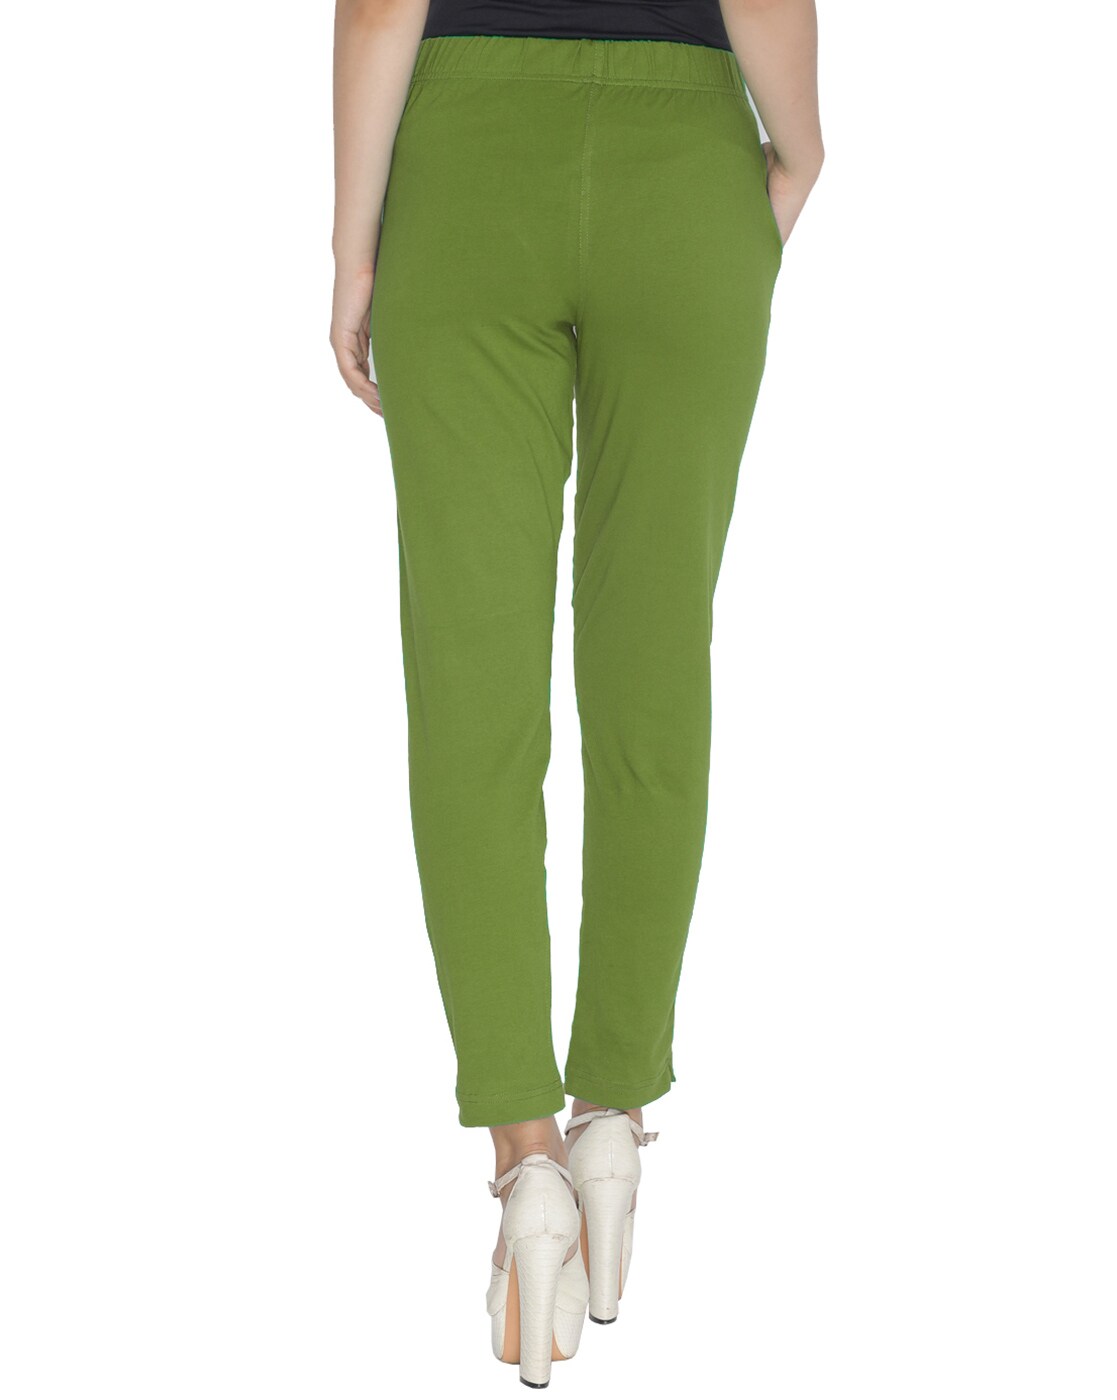 LUX LYRA Slim Fit Women Light Blue Trousers  Buy LUX LYRA Slim Fit Women  Light Blue Trousers Online at Best Prices in India  Flipkartcom